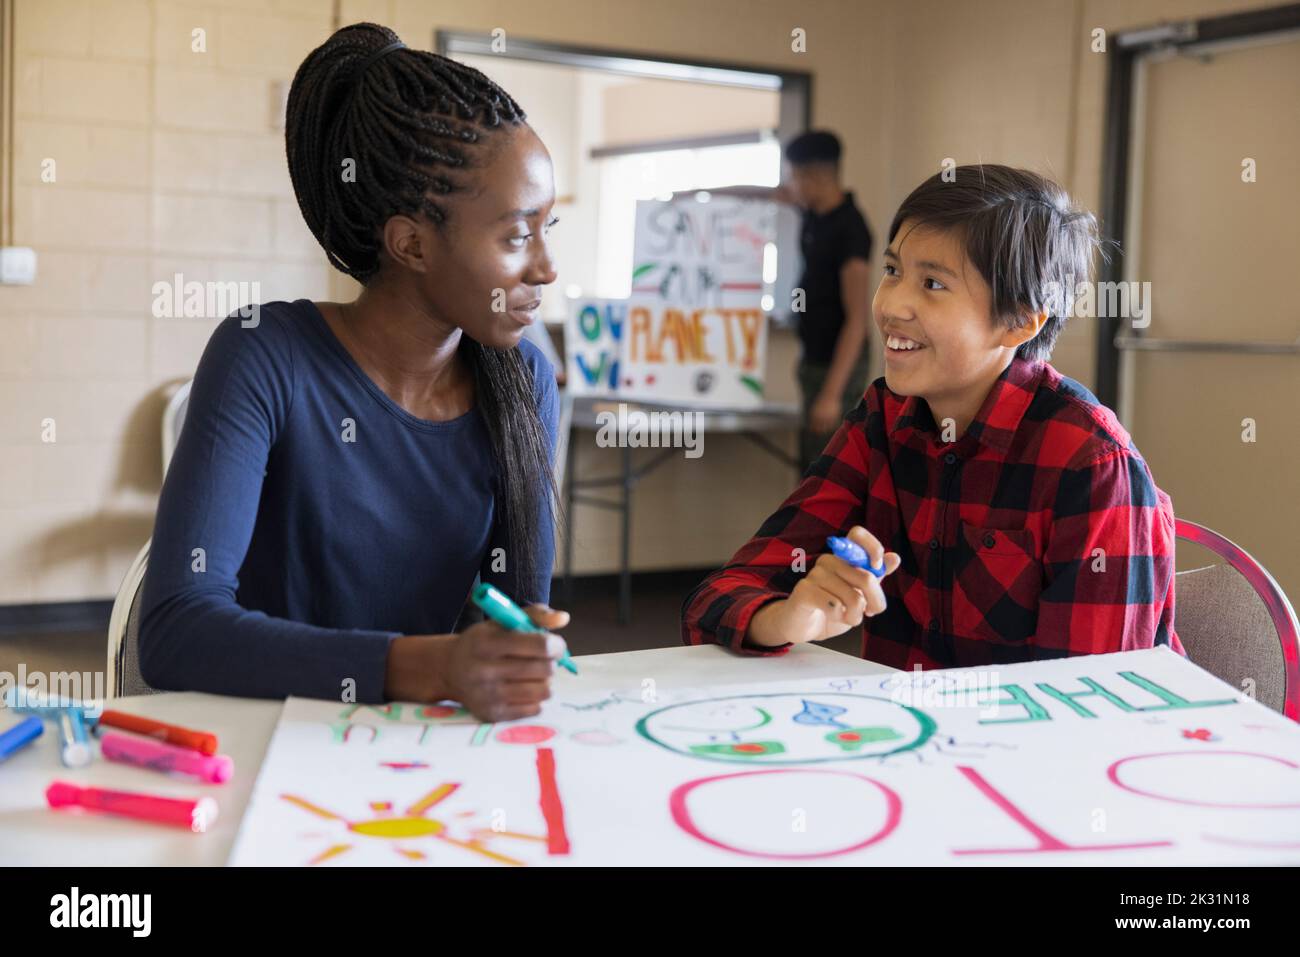 Teen environmental activists coloring poster in community center Stock Photo